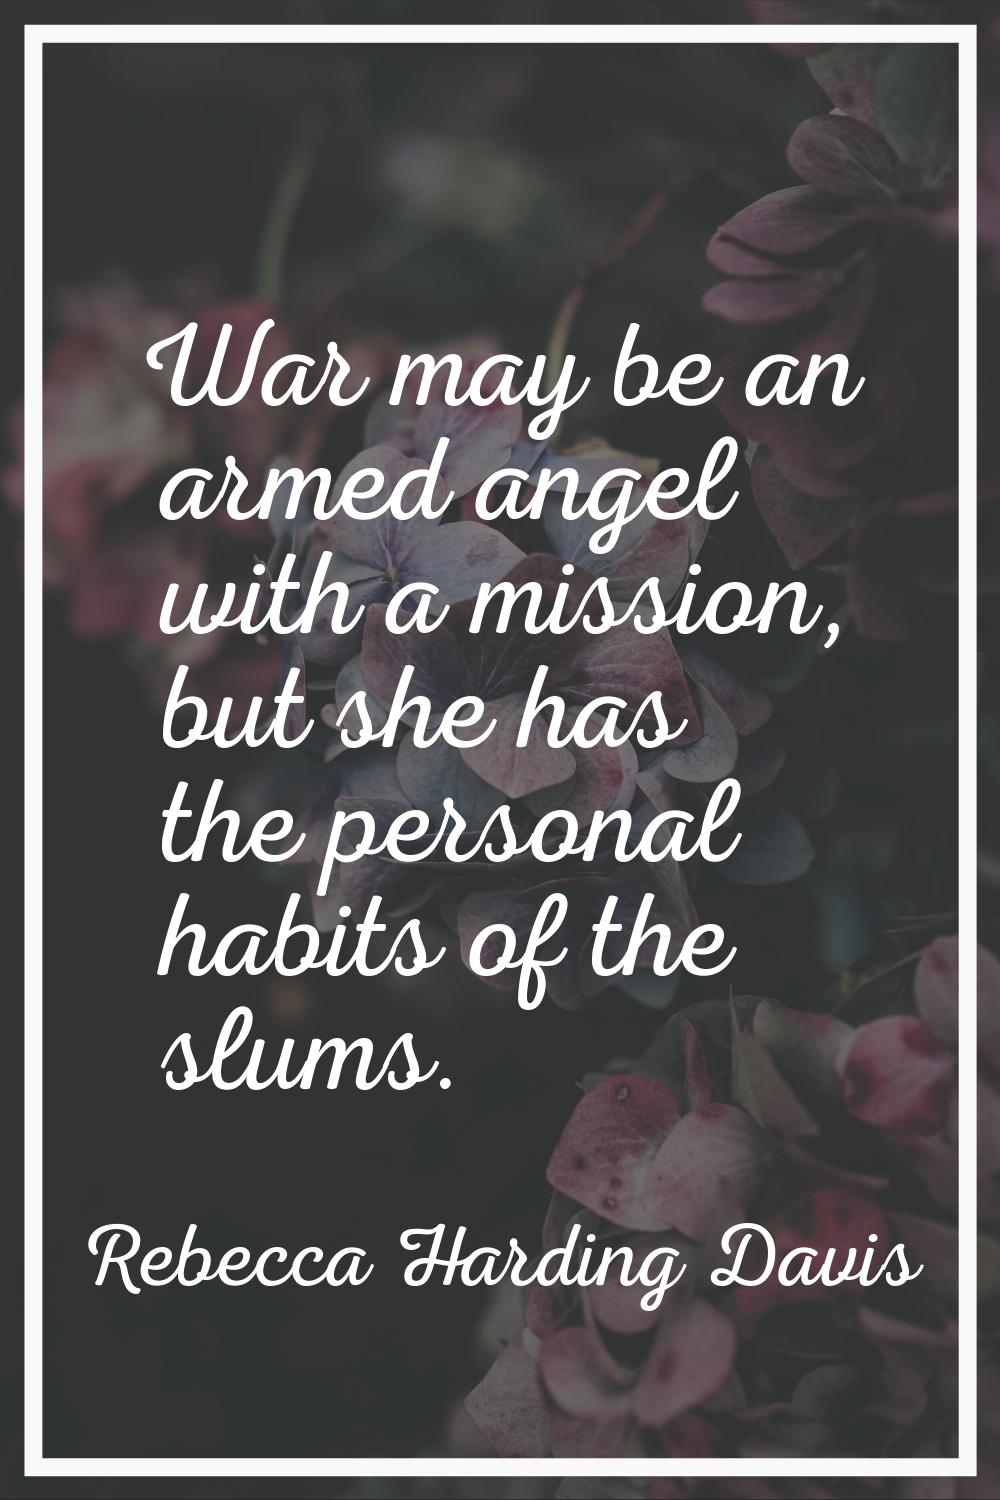 War may be an armed angel with a mission, but she has the personal habits of the slums.